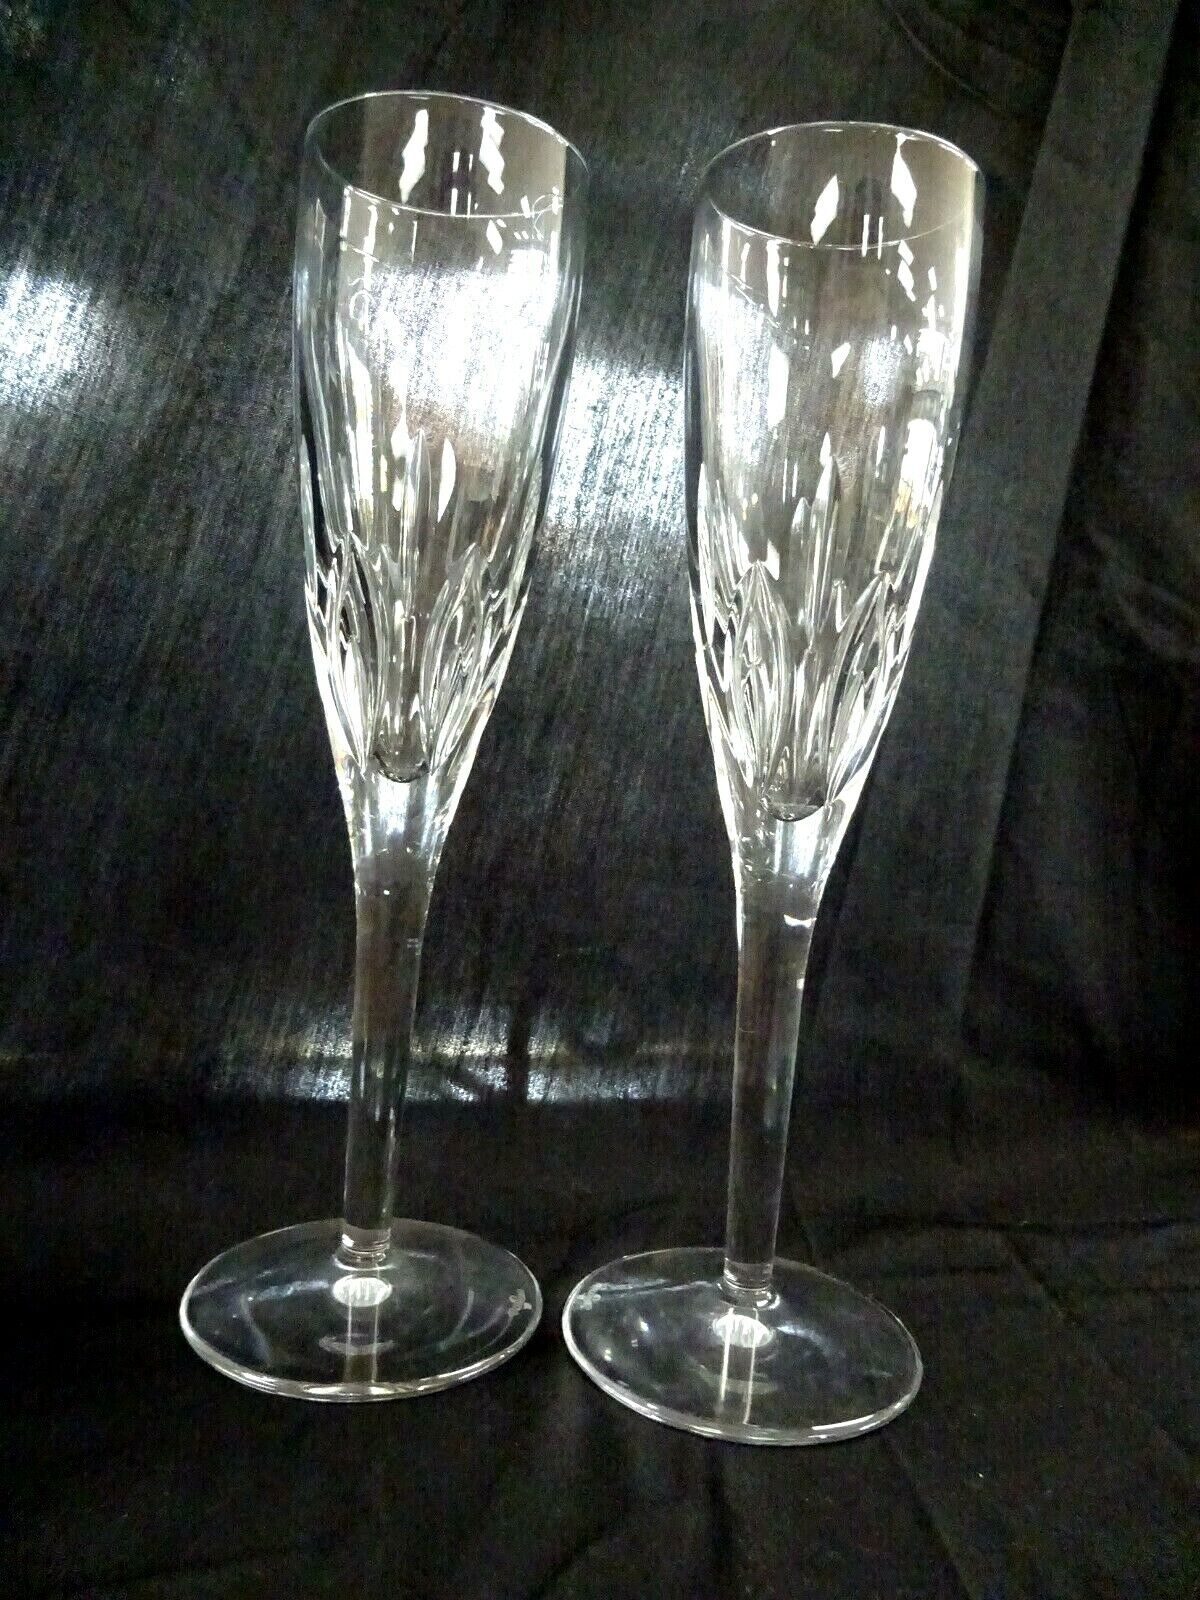 Waterford Irish Crystal ABBINGTON Champagne Flute,9.25", Lot of 4,MINT CONDITION